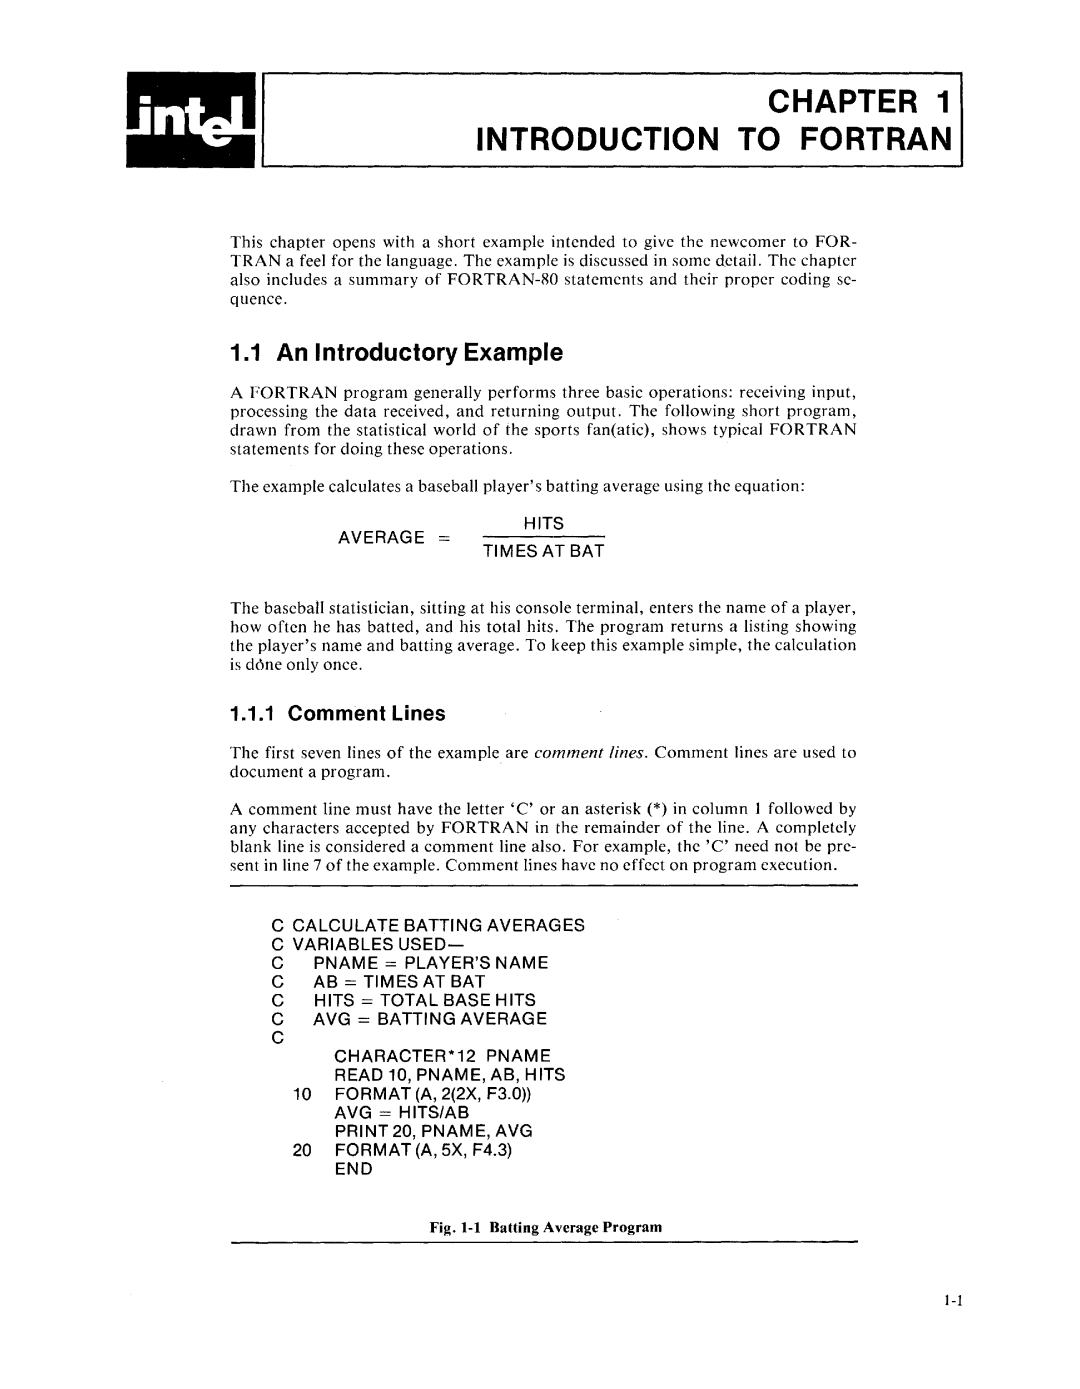 Intel fortran-80 manual Chapter Introduction To Fortran, An Introductory Example, Comment Lines 